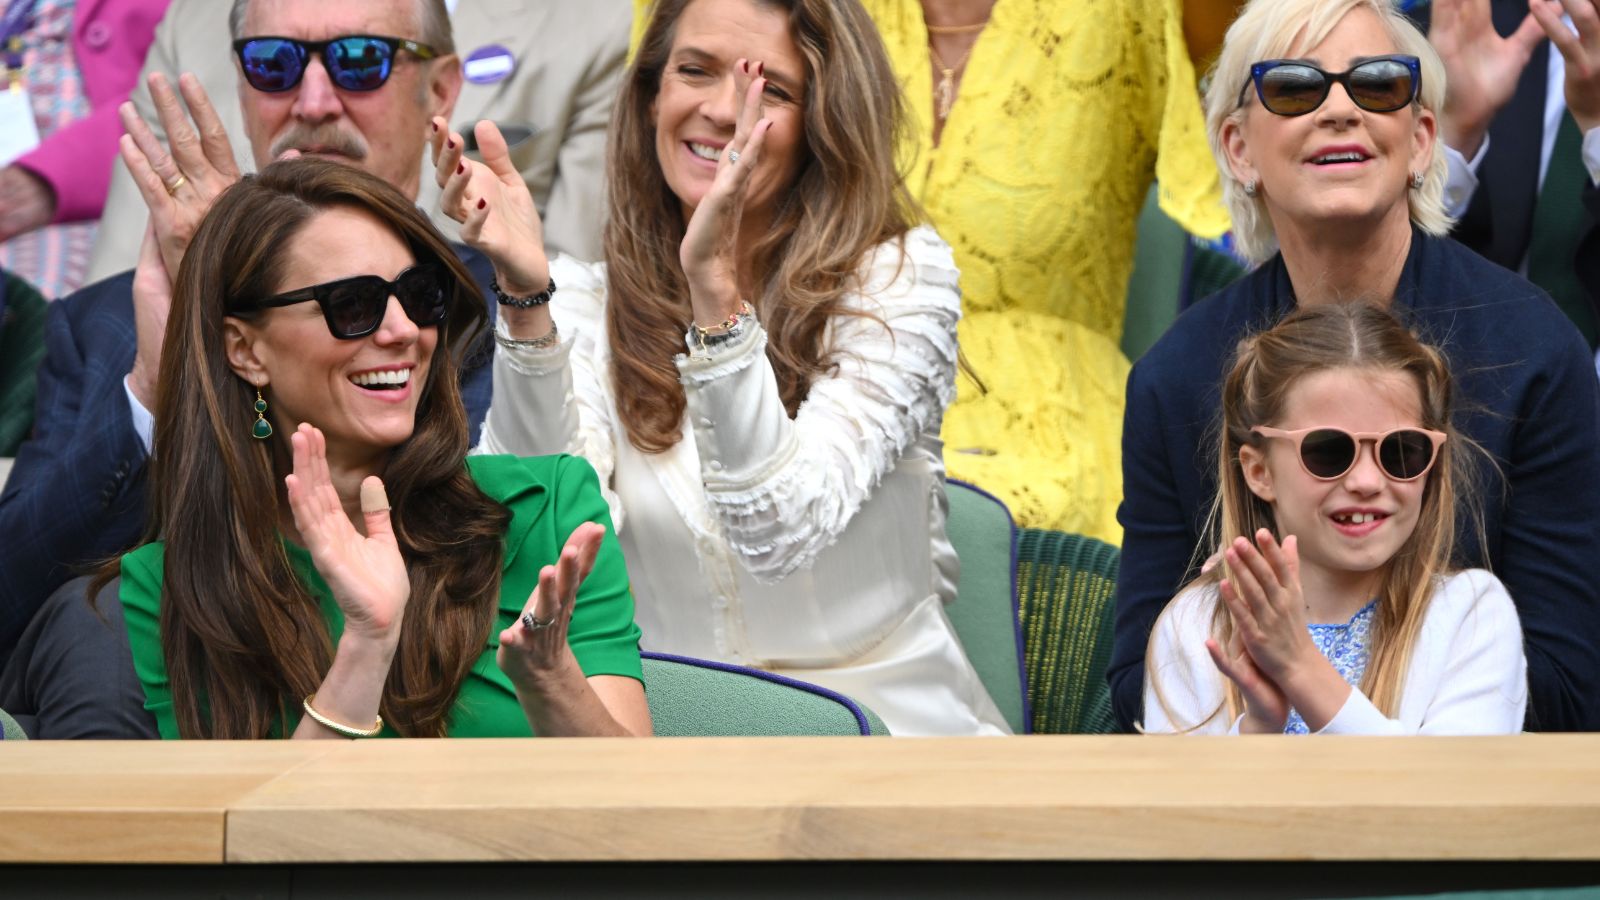 Princess Kate takes her seat in Royal Box at Wimbledon, right next to Roger  Federer